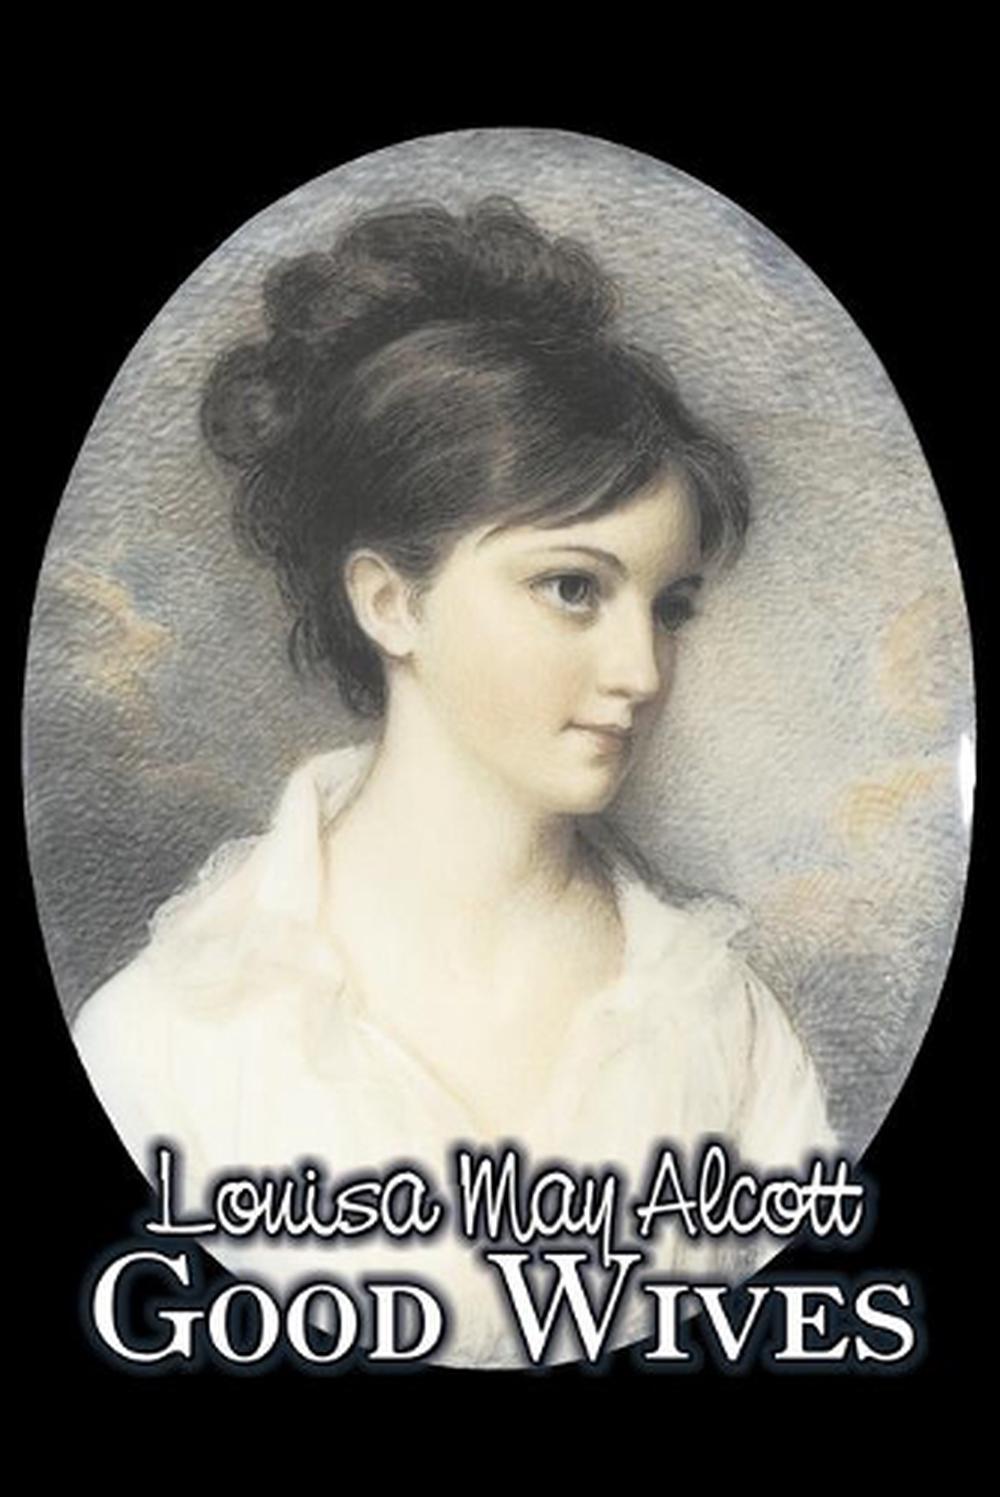 Good Wives by Louisa May Alcott (English) Paperback Book Free Shipping! 9781606641316 | eBay